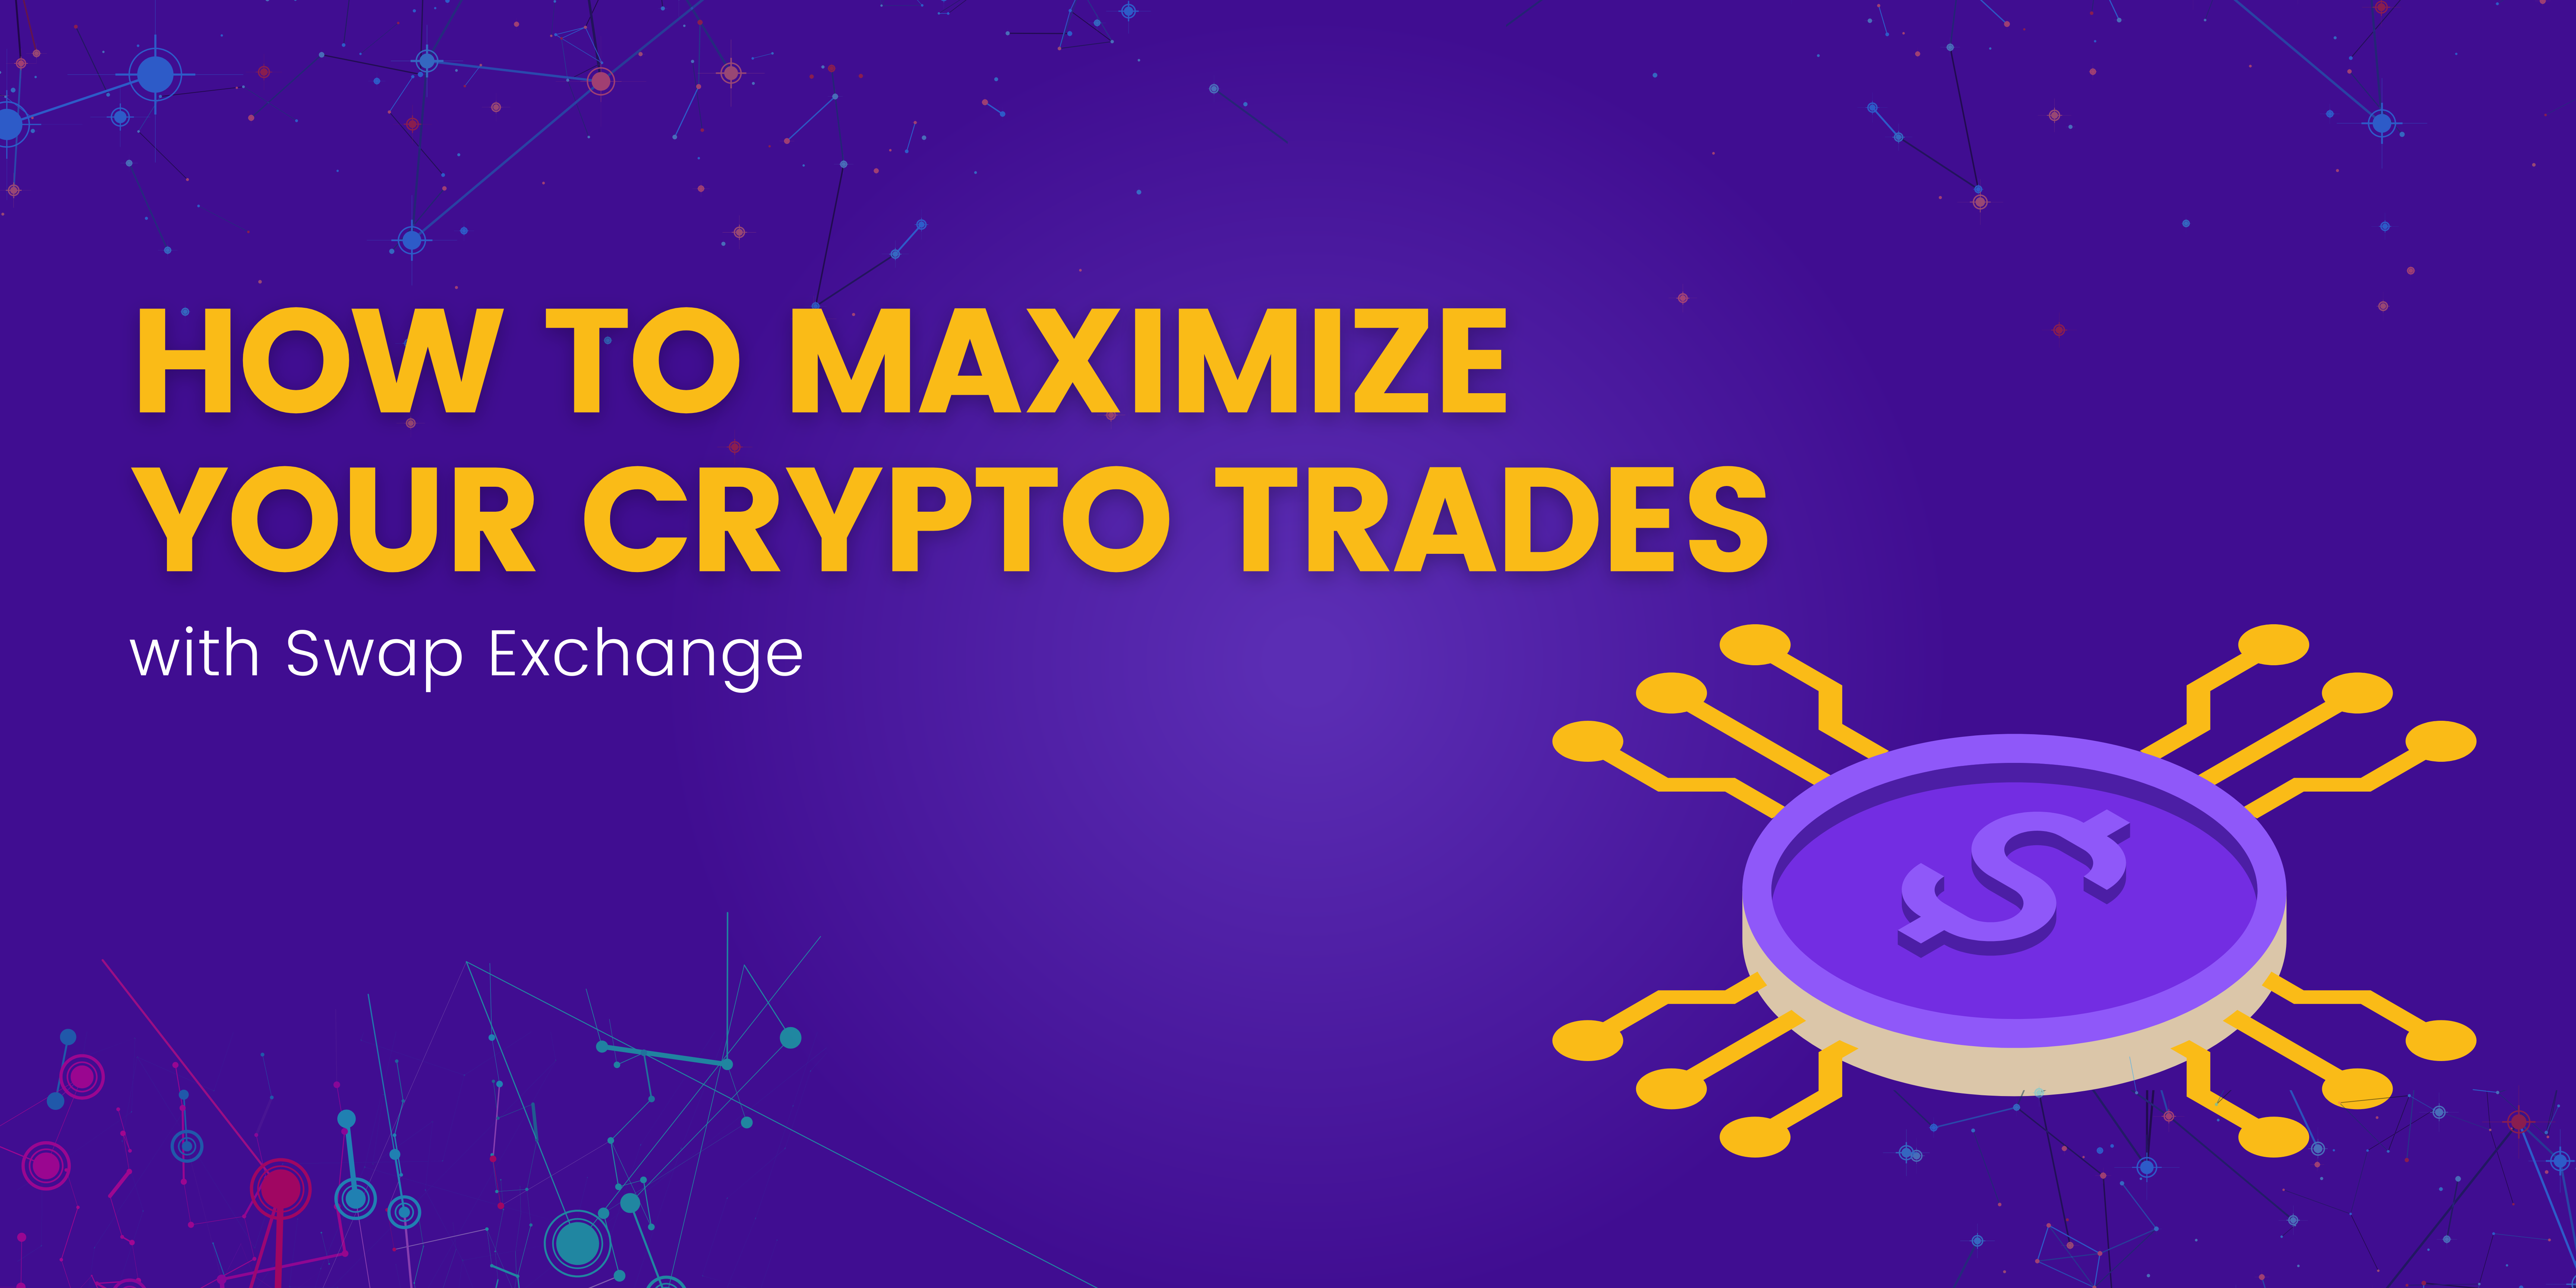 How to Maximize Your Crypto Trades with a Swap Exchange